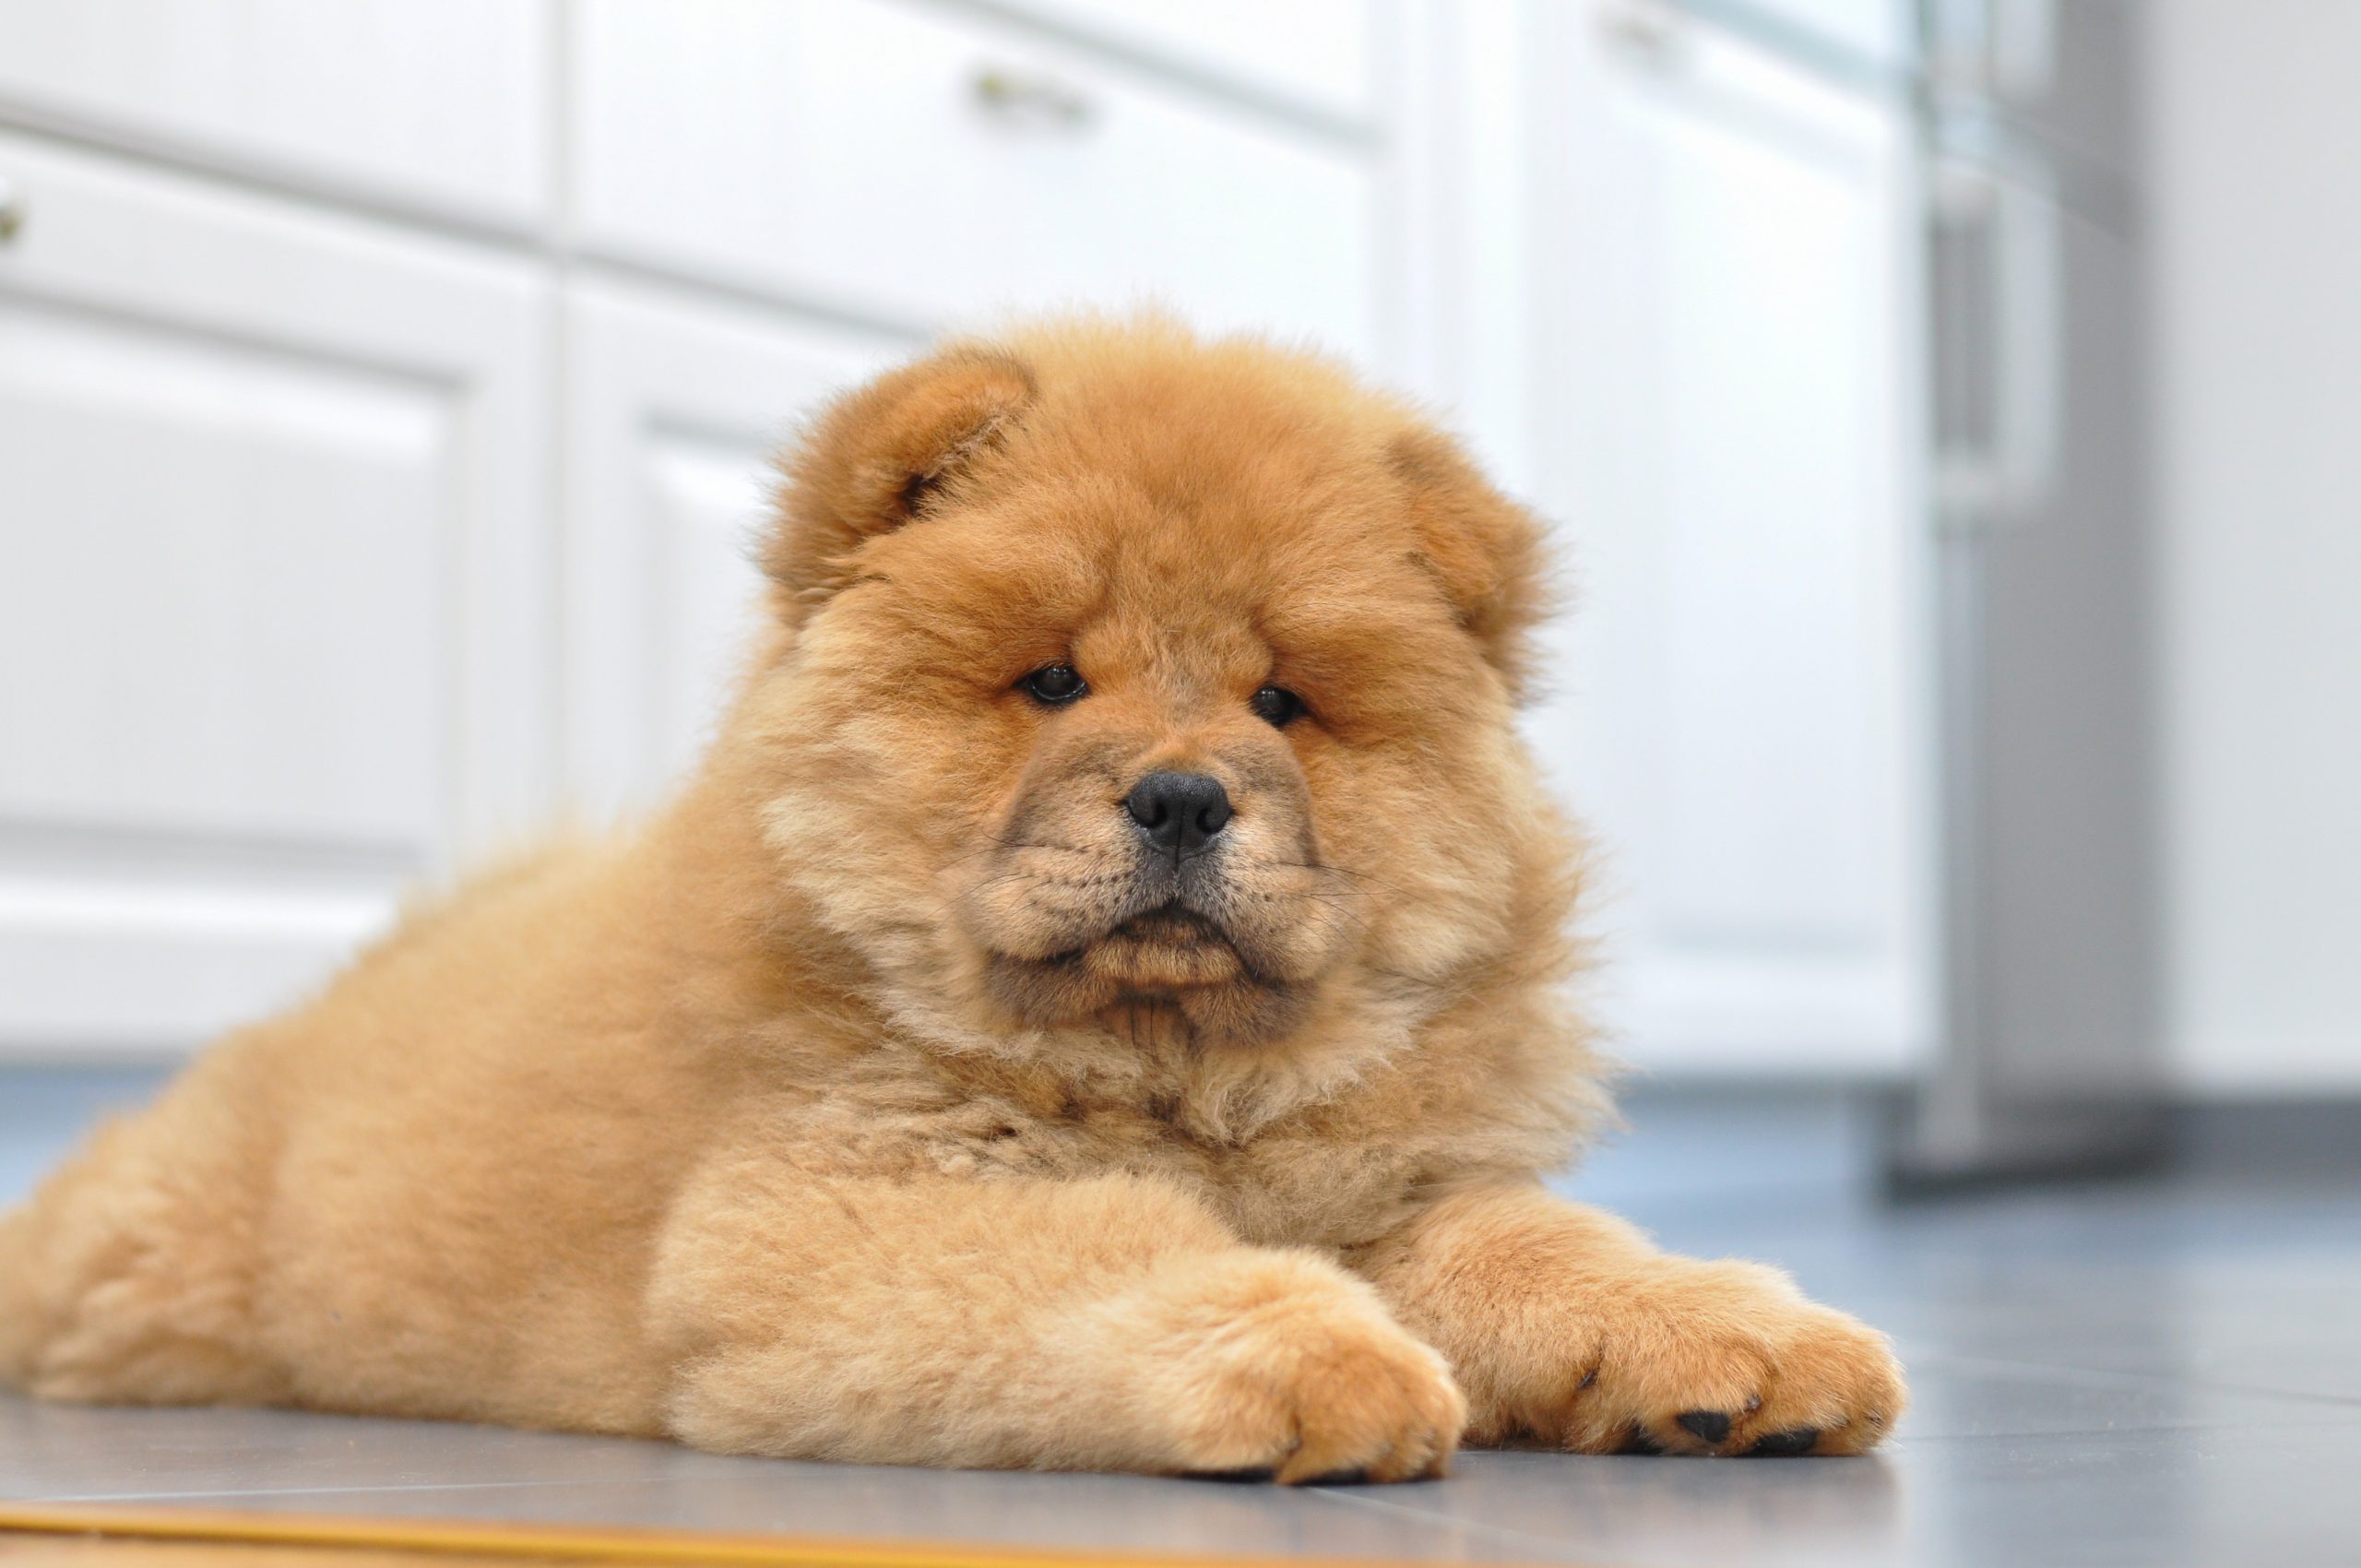 If You Want to Know the Number of 👶🏻 Kids You’ll Have, Choose Some 🐶 Dogs to Find Out Chow Chow